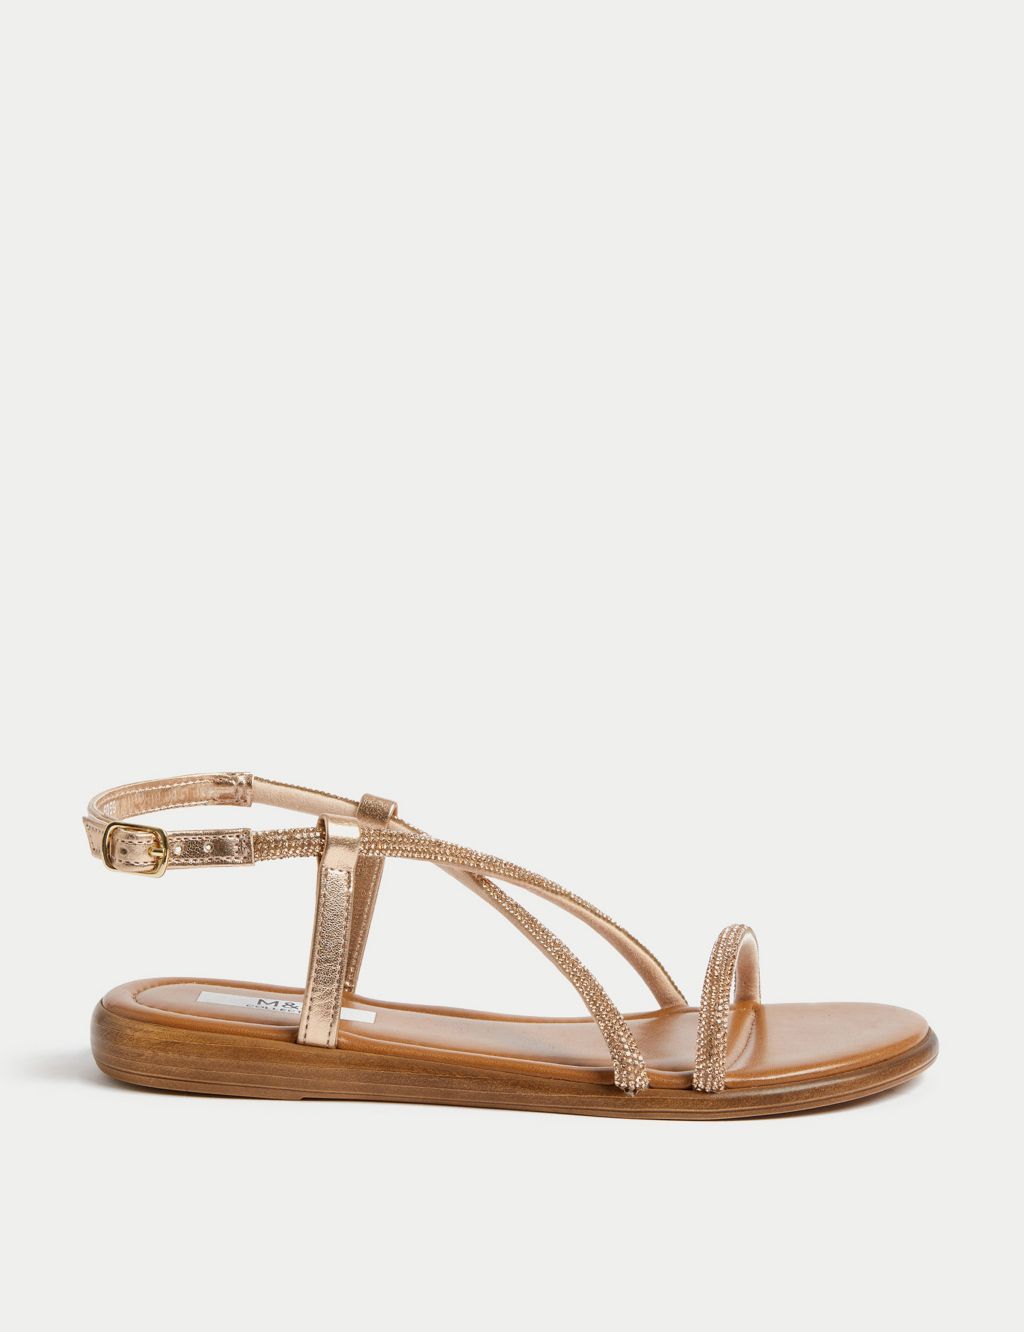 Sparkle Strappy Flat Sandals image 1